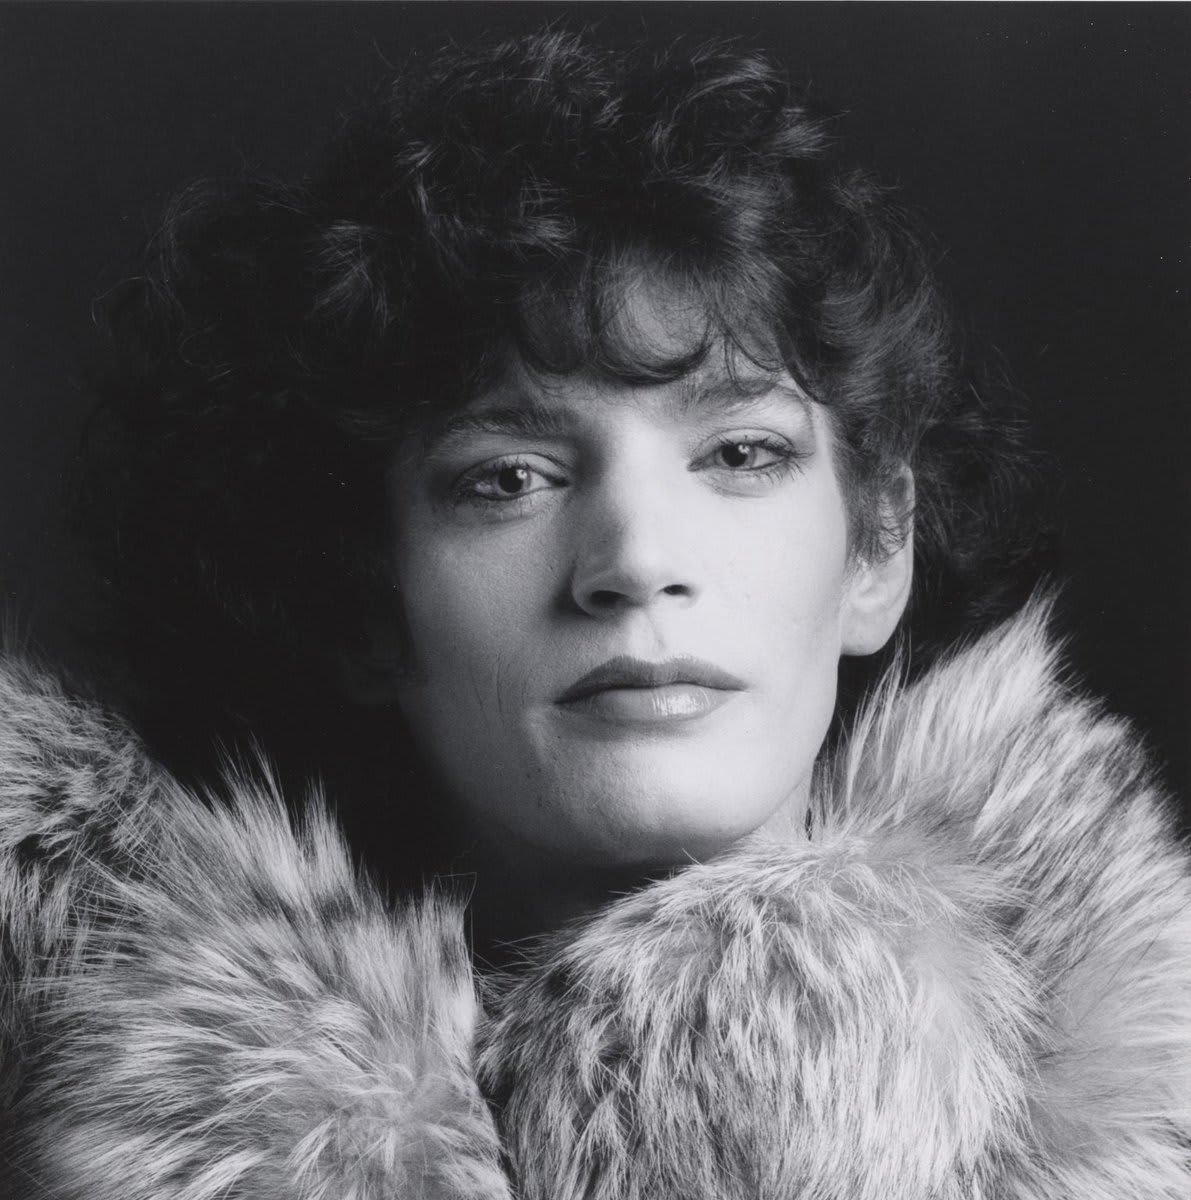 👂 Weekend listening: In this podcast, Sandra Jean Pierre discusses the blurred lines between person and persona in art. Tune in here: https://t.co/WkVOXCUoyd Robert Mapplethorpe, Self Portrait 1980-1999